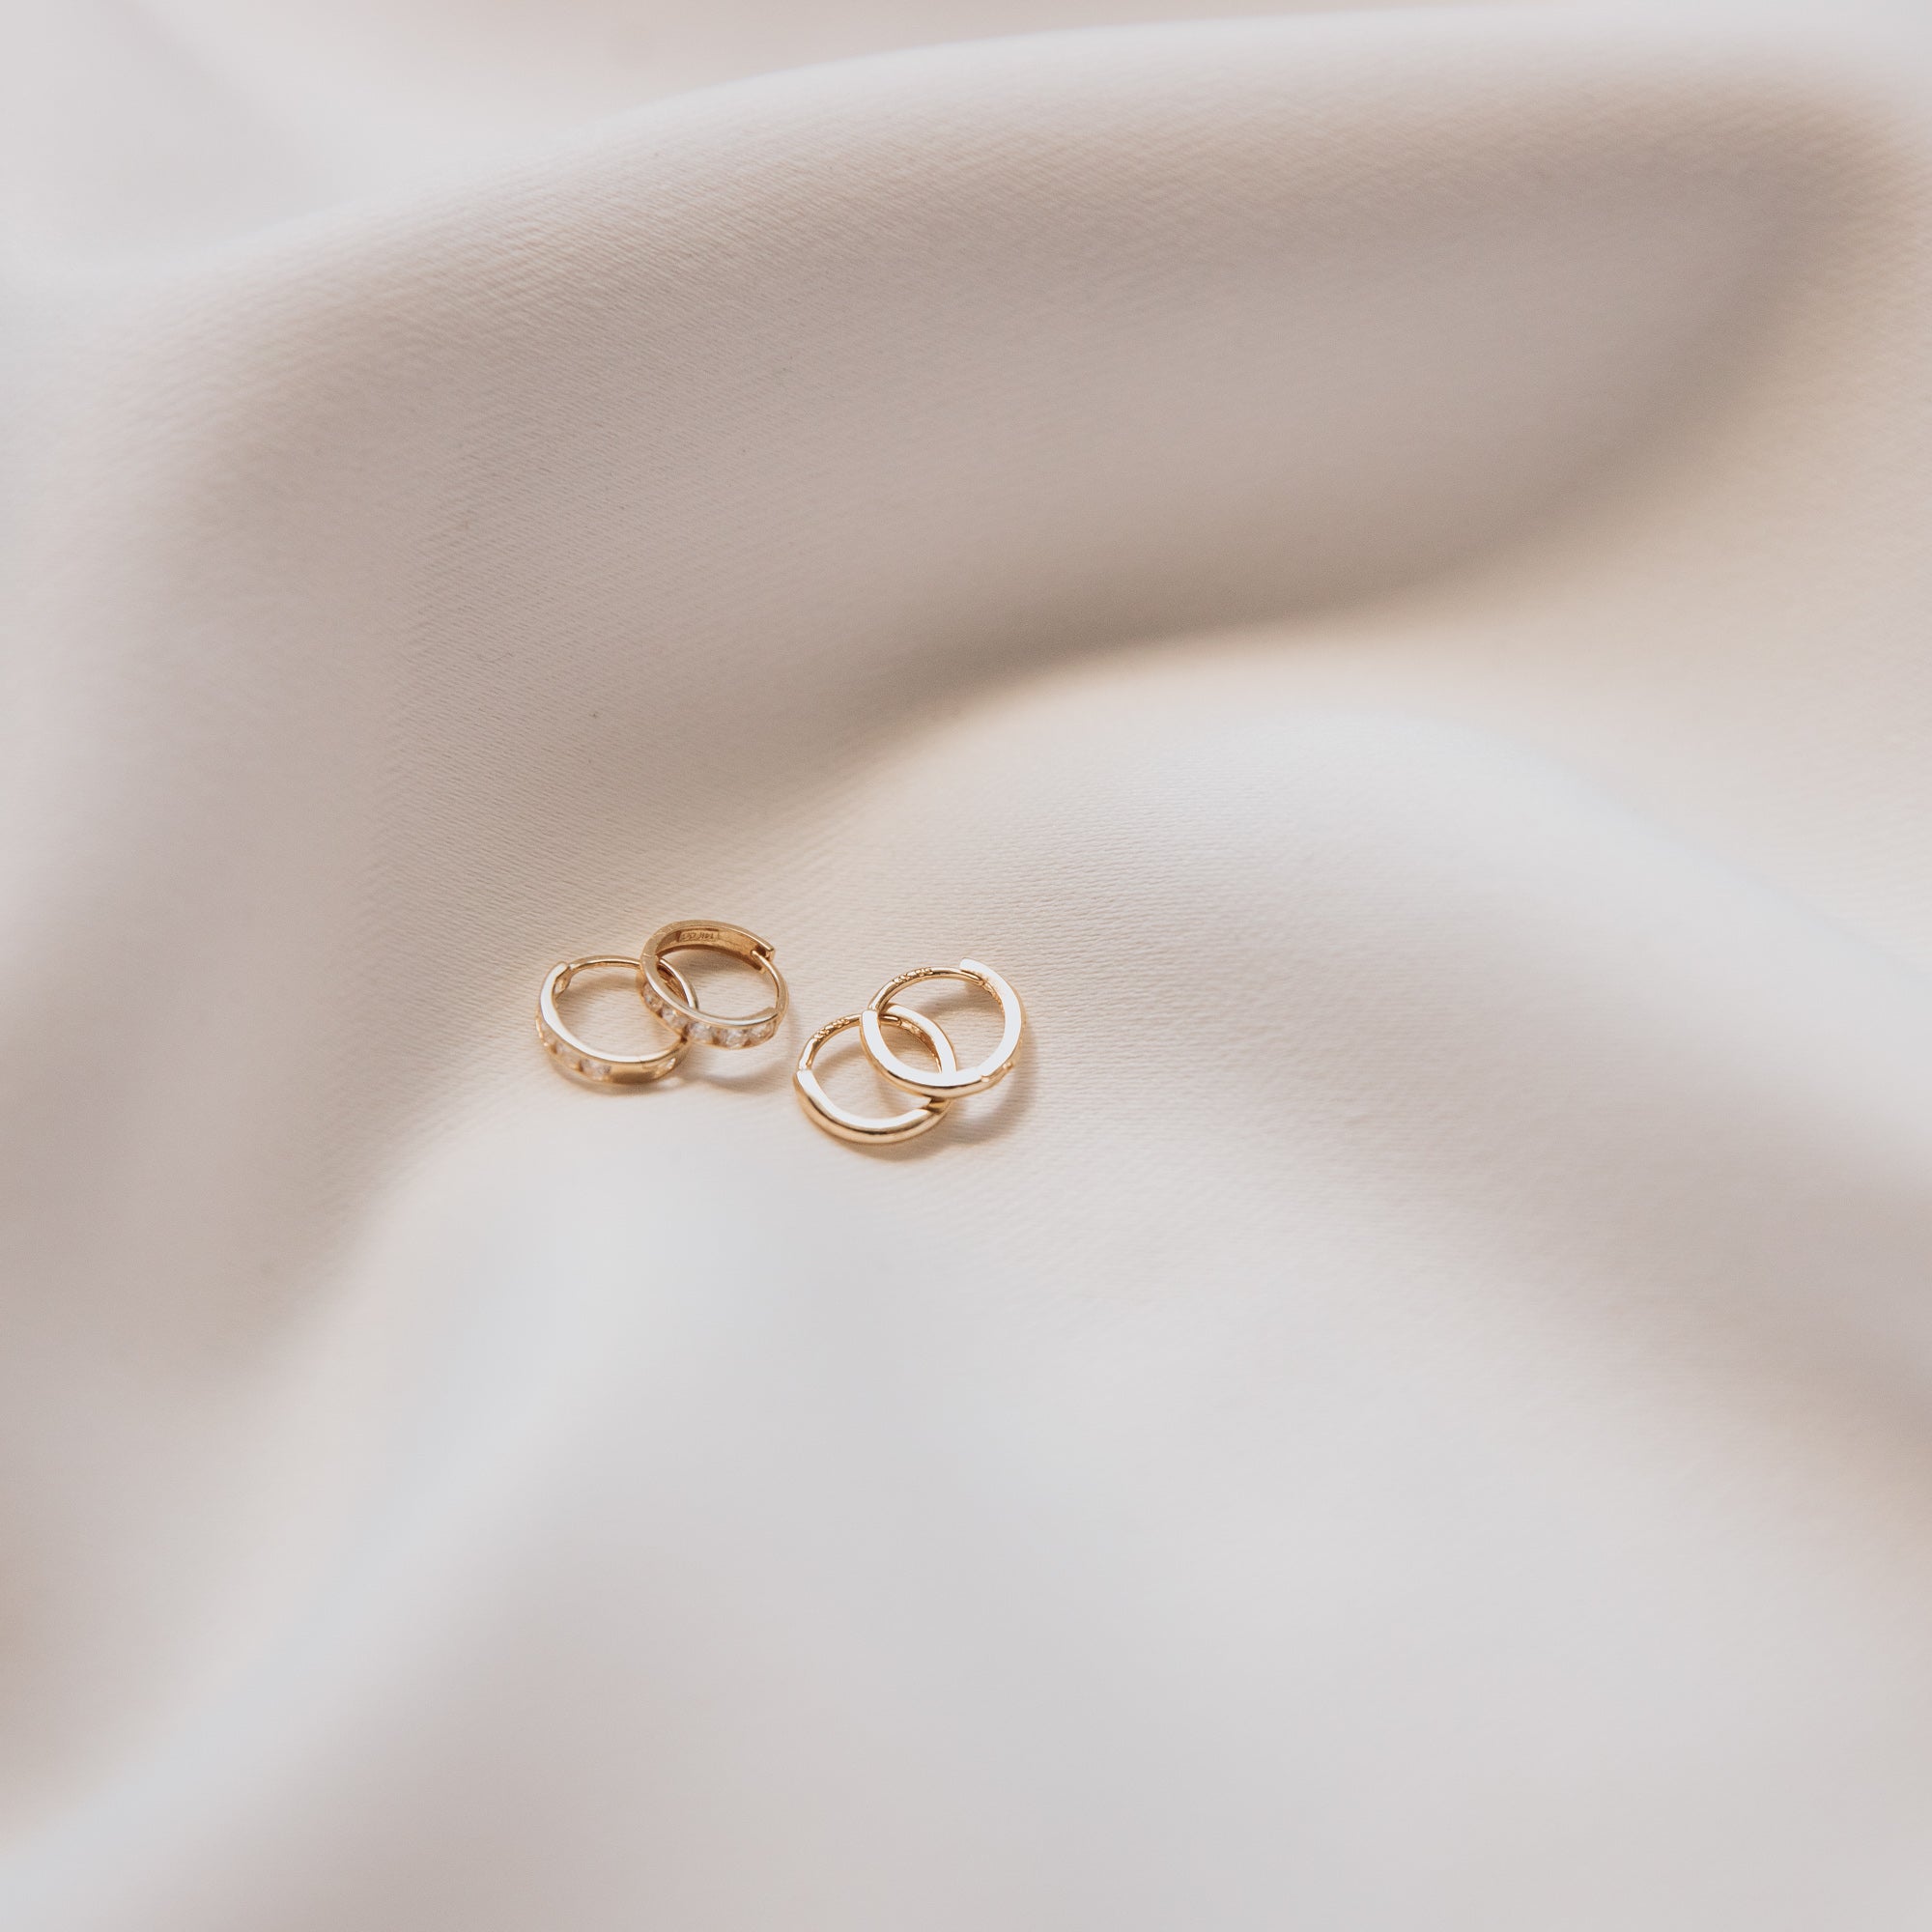 Place In My Heart 14k Baby Hoops from Erin Fader Jewelry